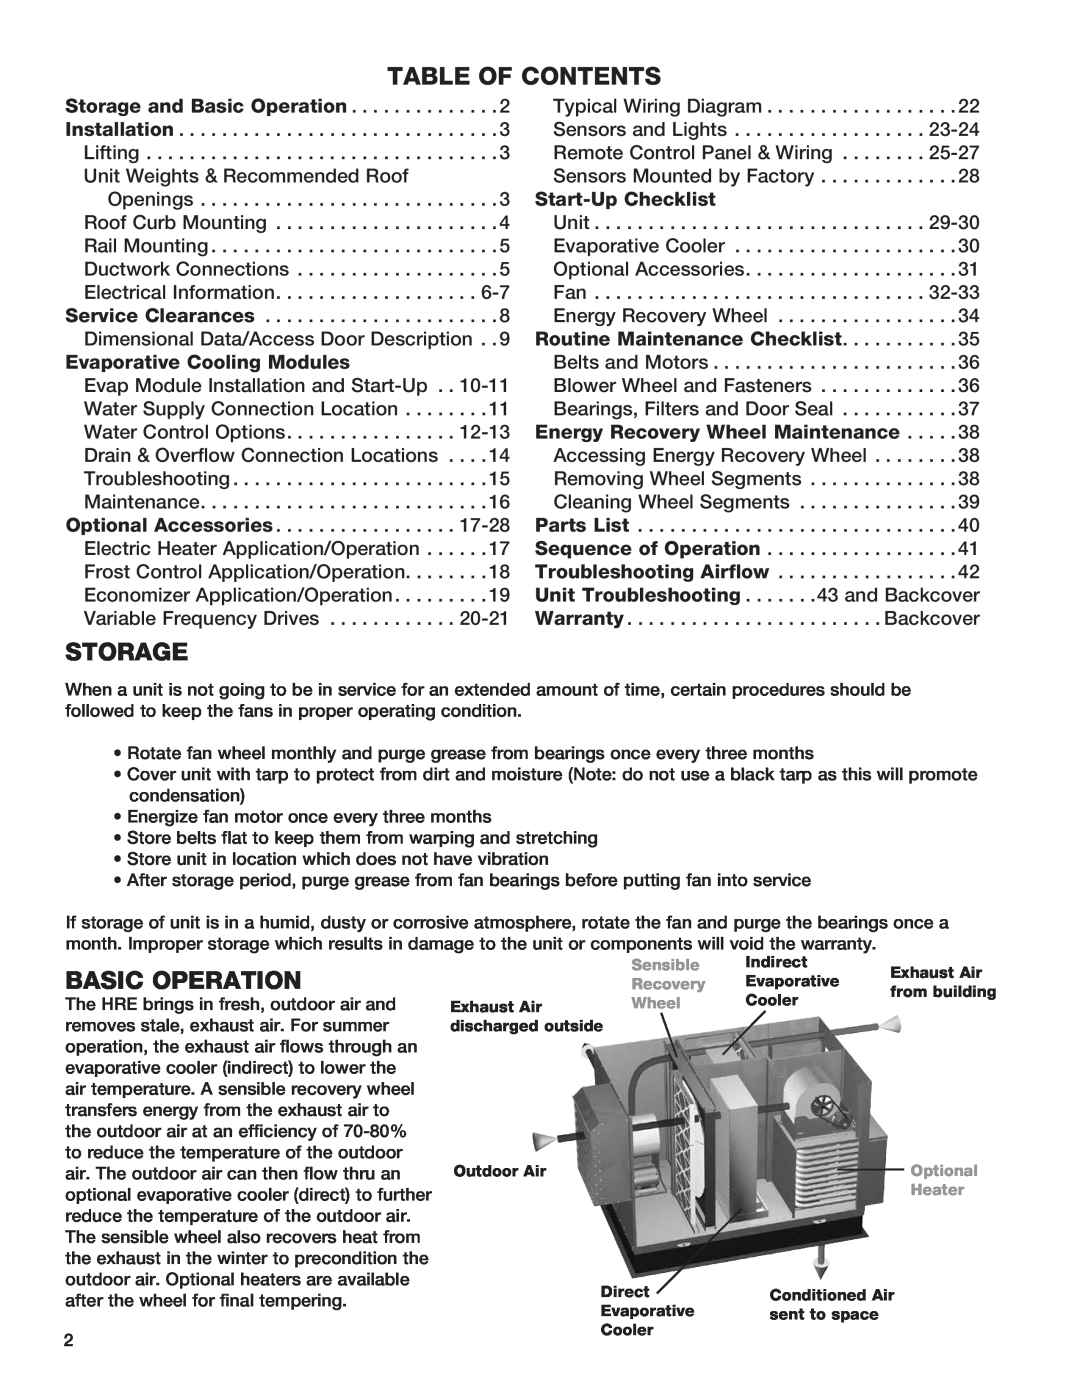 Greenheck Fan 55, 90, 45 Table Of Contents, Storage and Basic Operation, UpChecklist, Routine Maintenance Checklist 